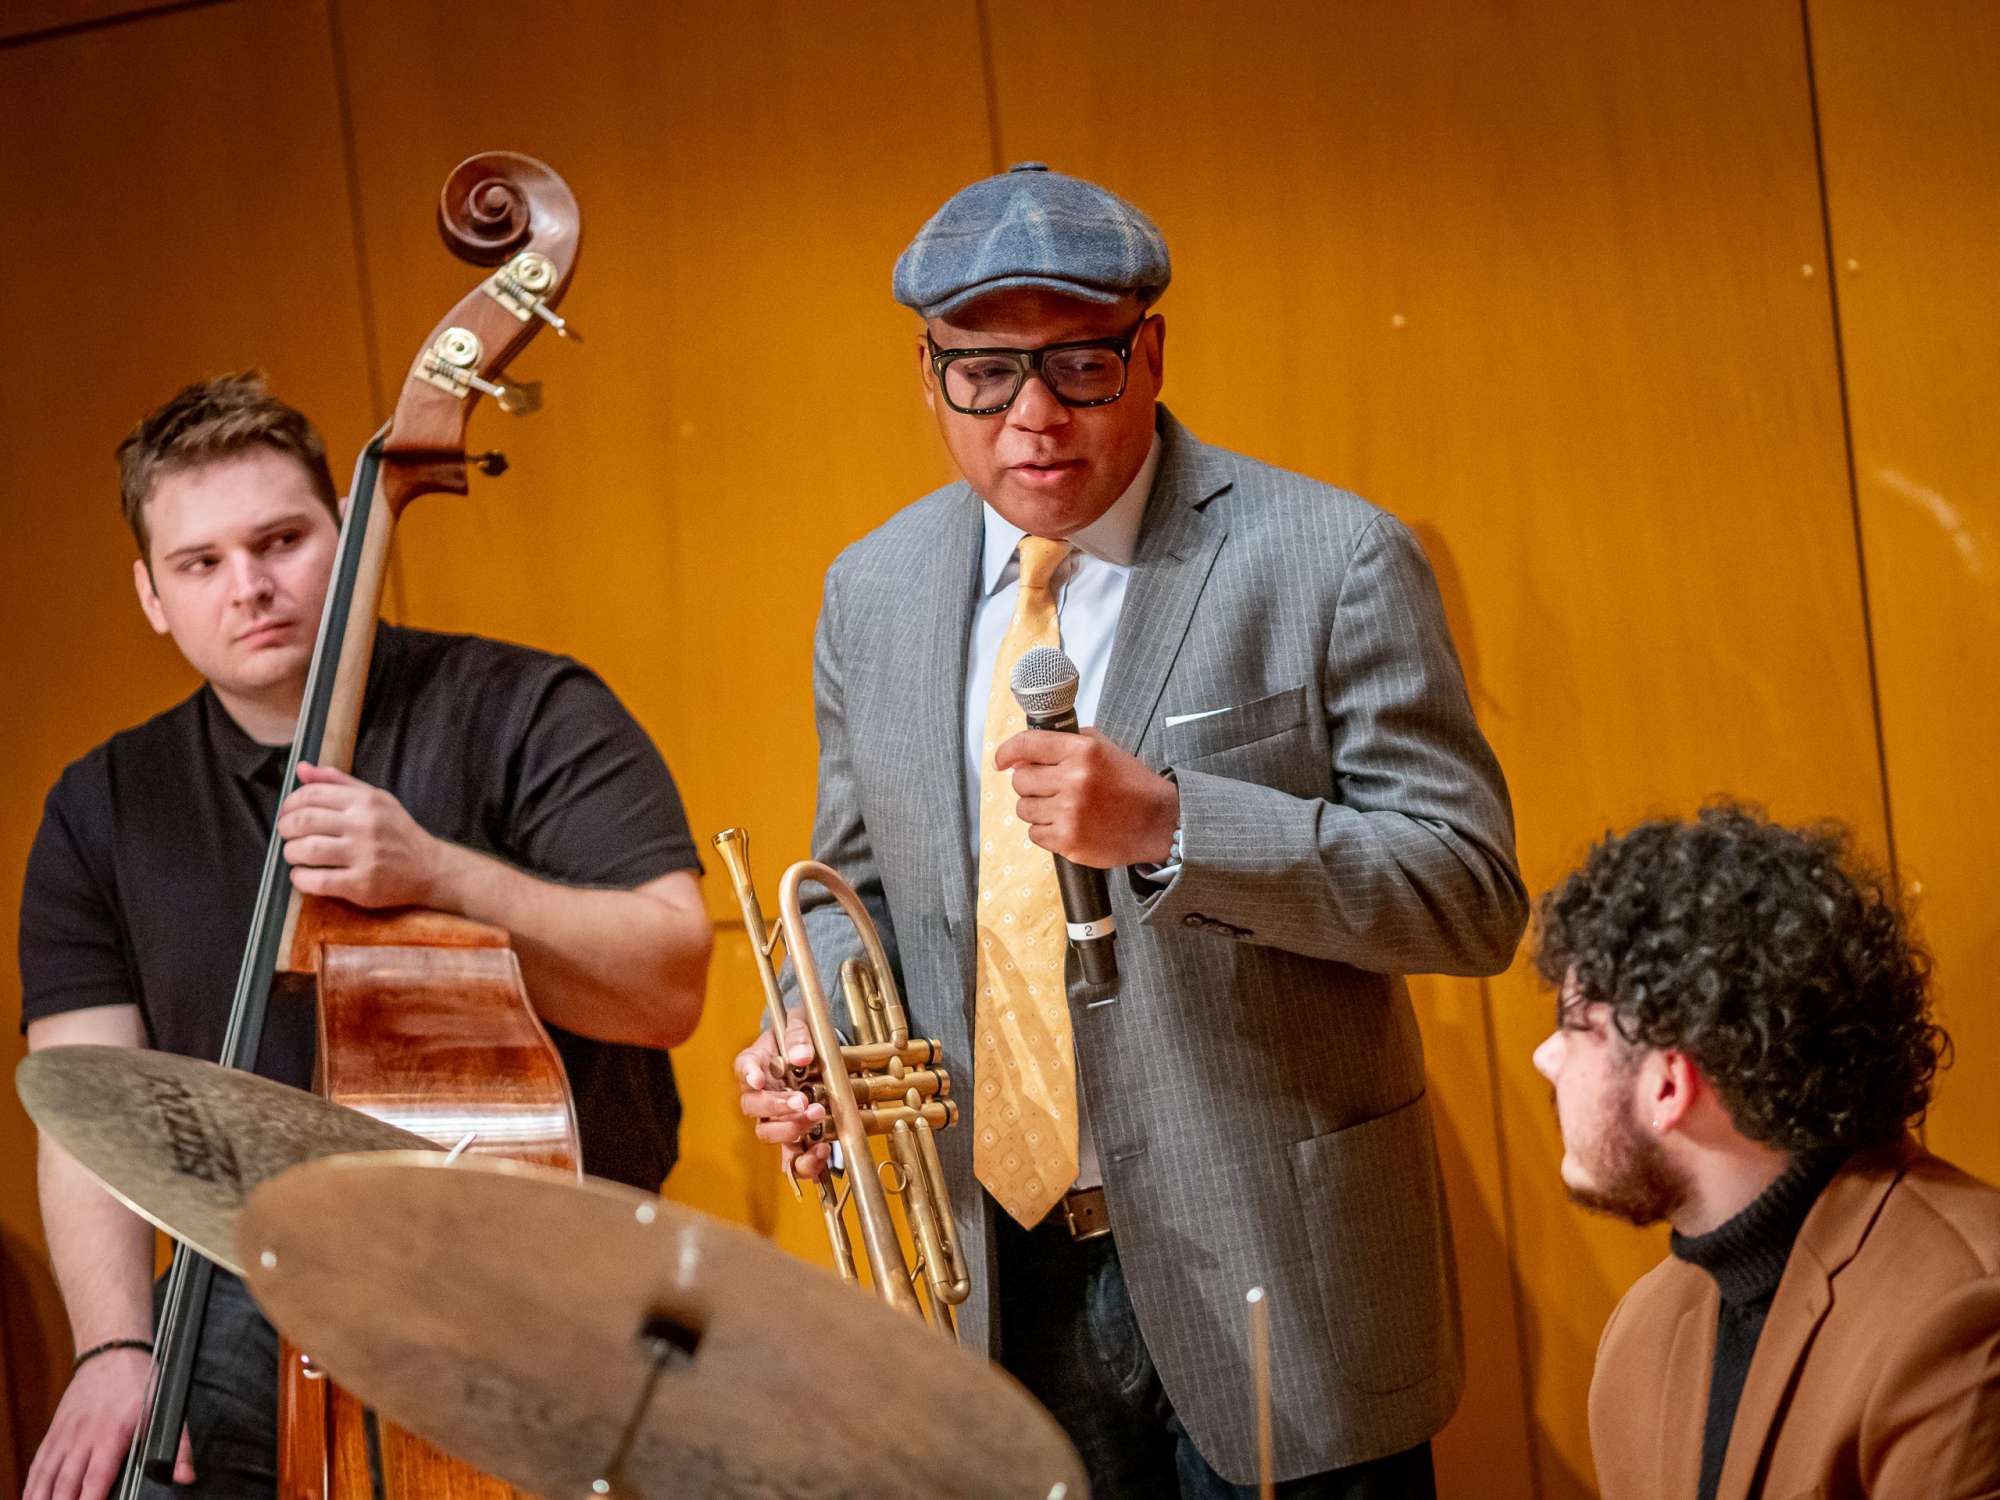 Wynton Marsalis with bassist Nathan Perrucci and drummer Zack Perez